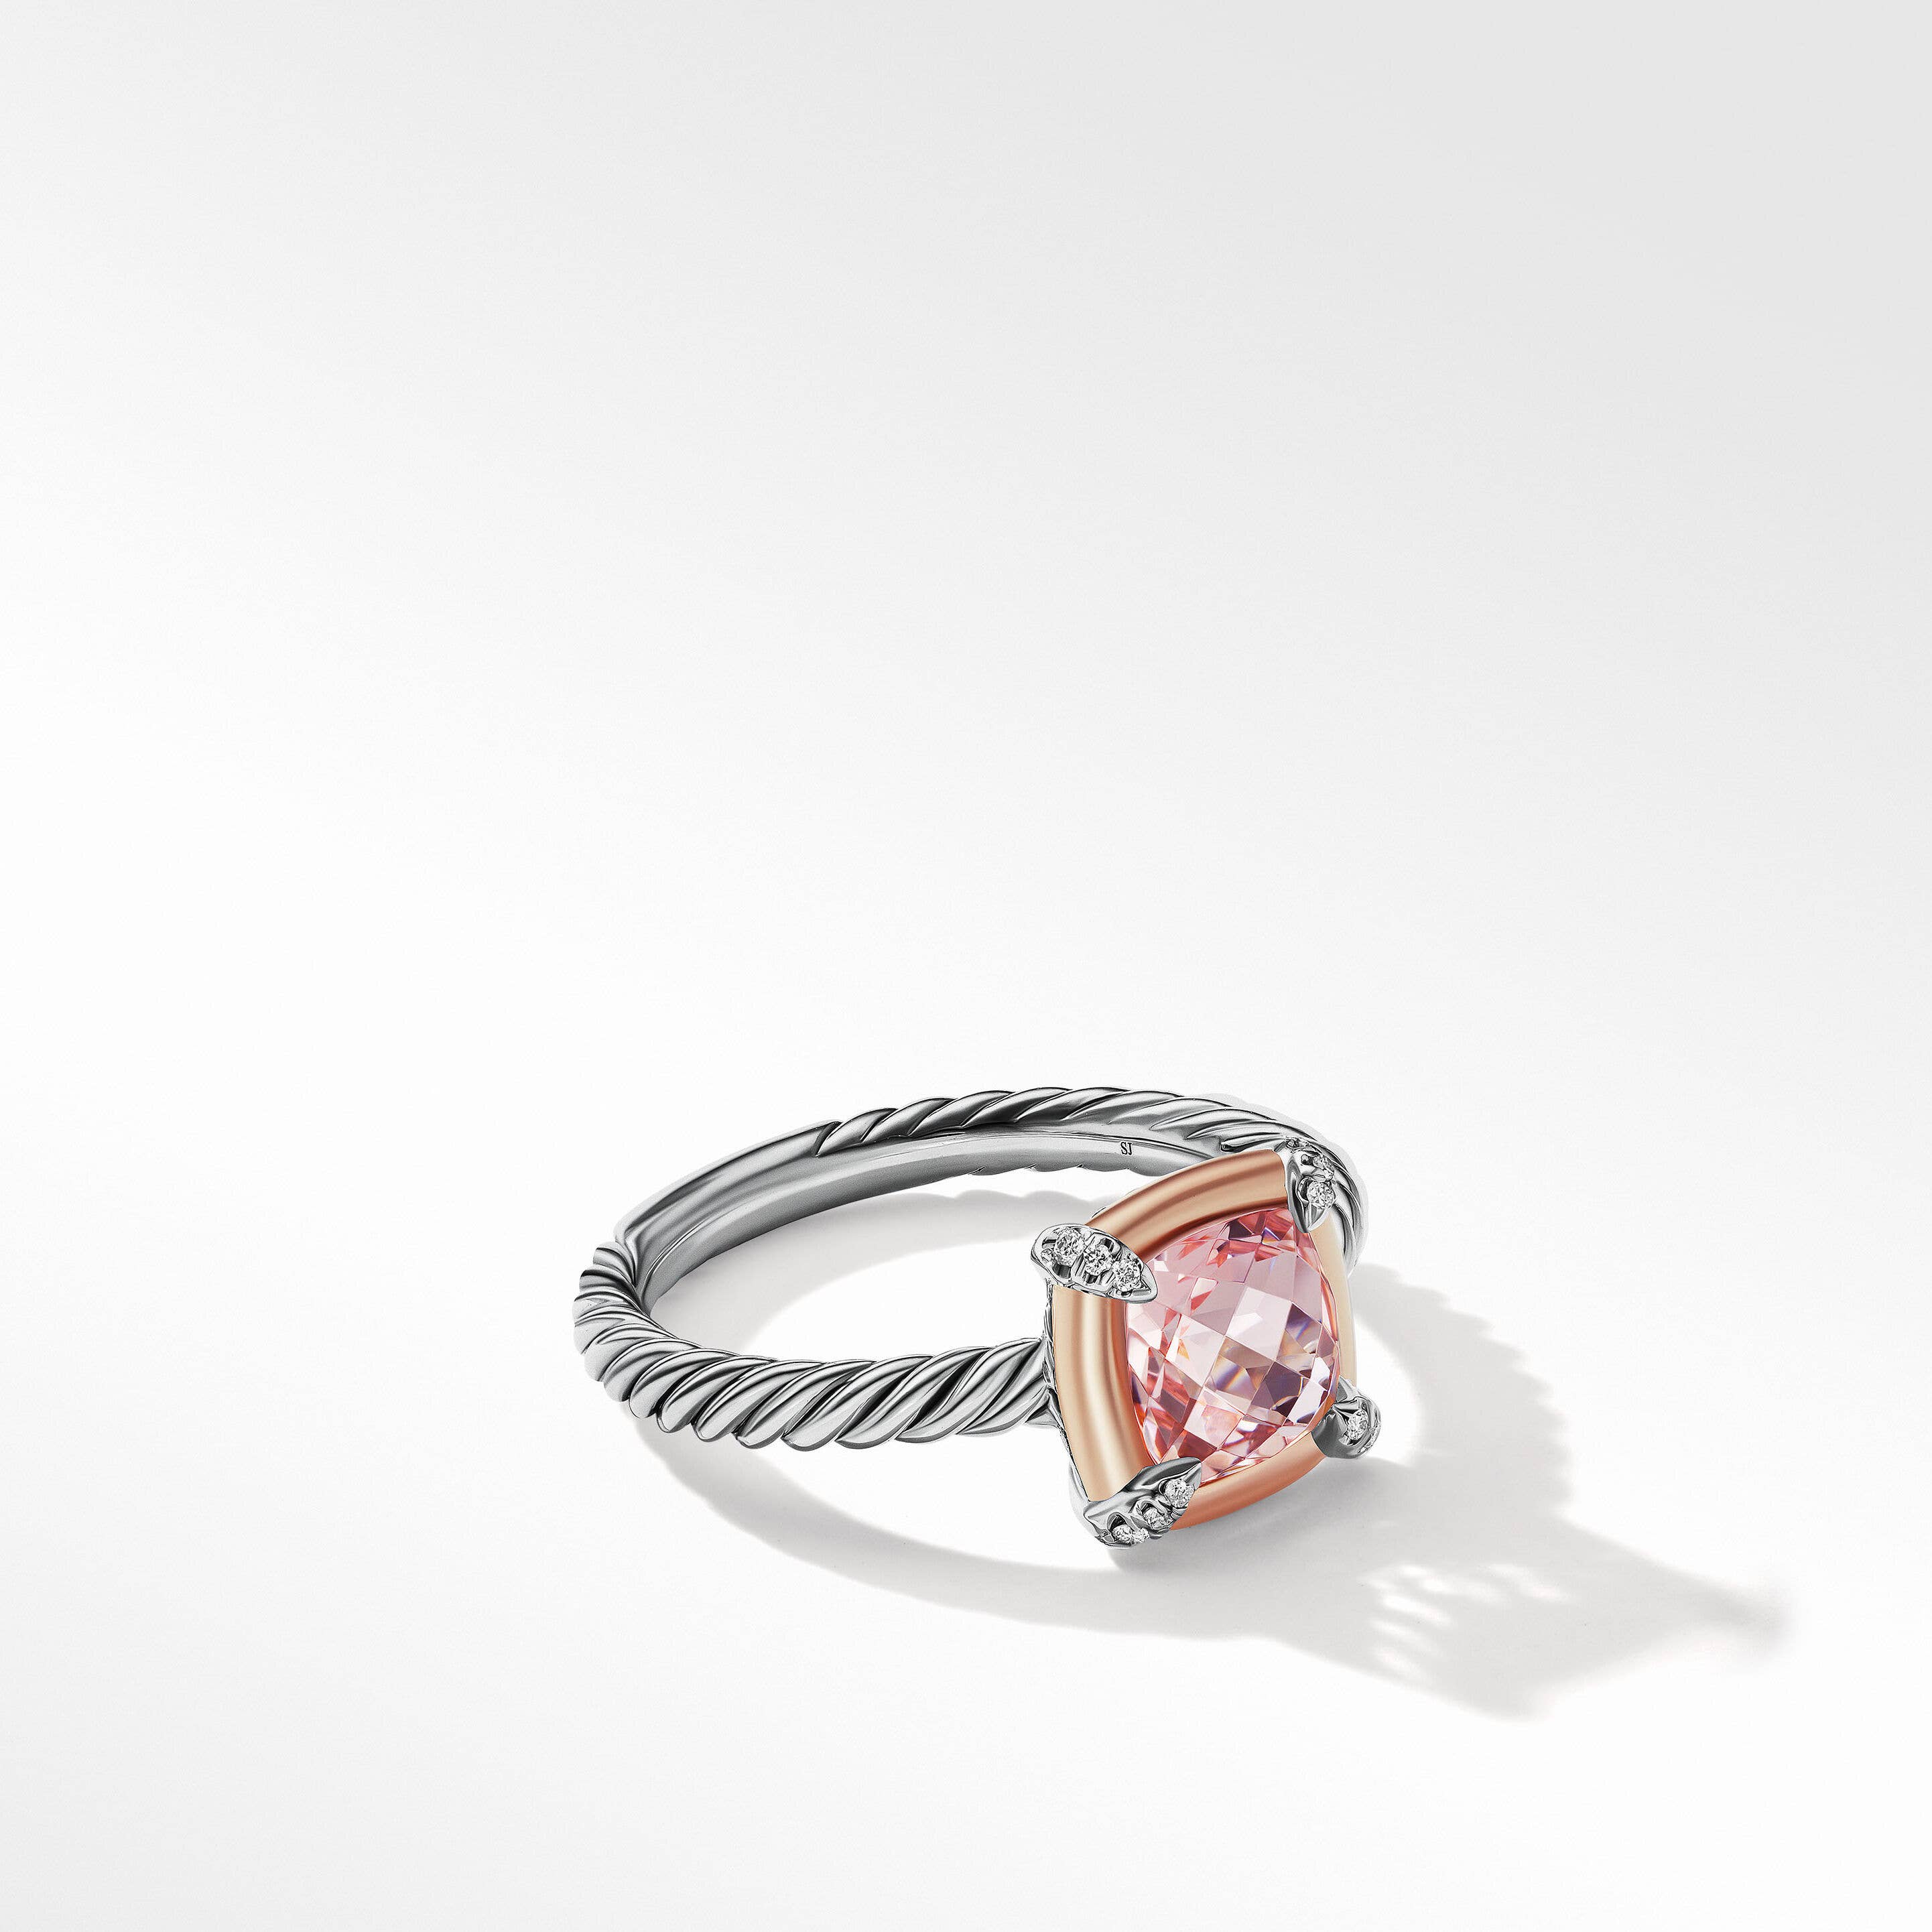 Petite Chatelaine® Ring in Sterling Silver with Morganite, 18K Rose Gold and Pavé Diamonds